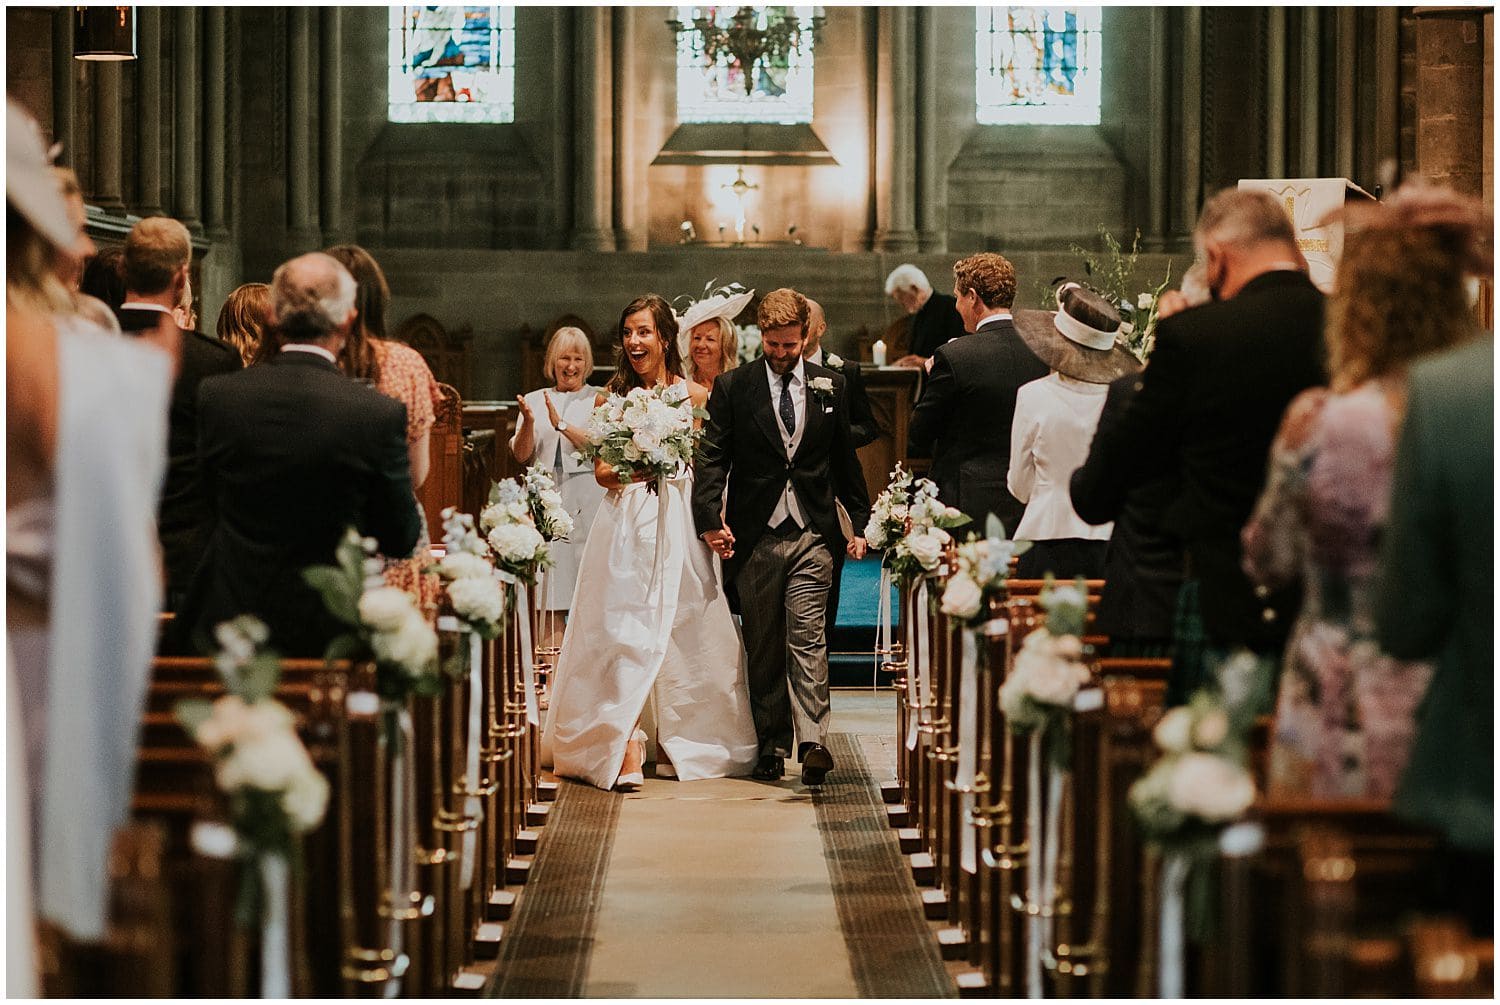 Brechin Cathedral wedding photographer